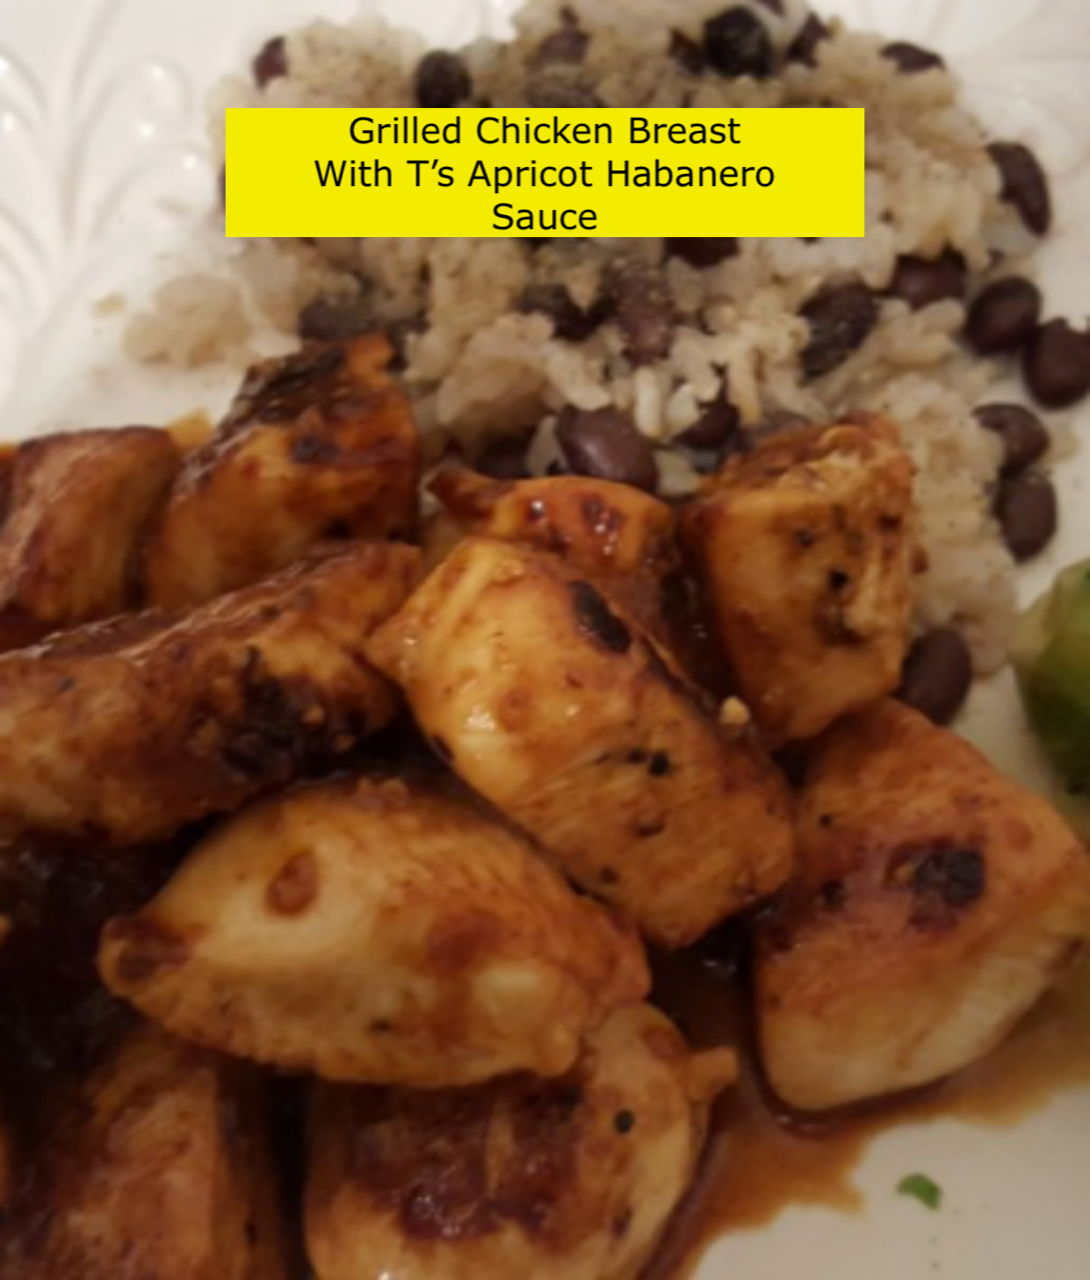 NEW GALLERY APRICOT HAB CHICKEN BREAST.png